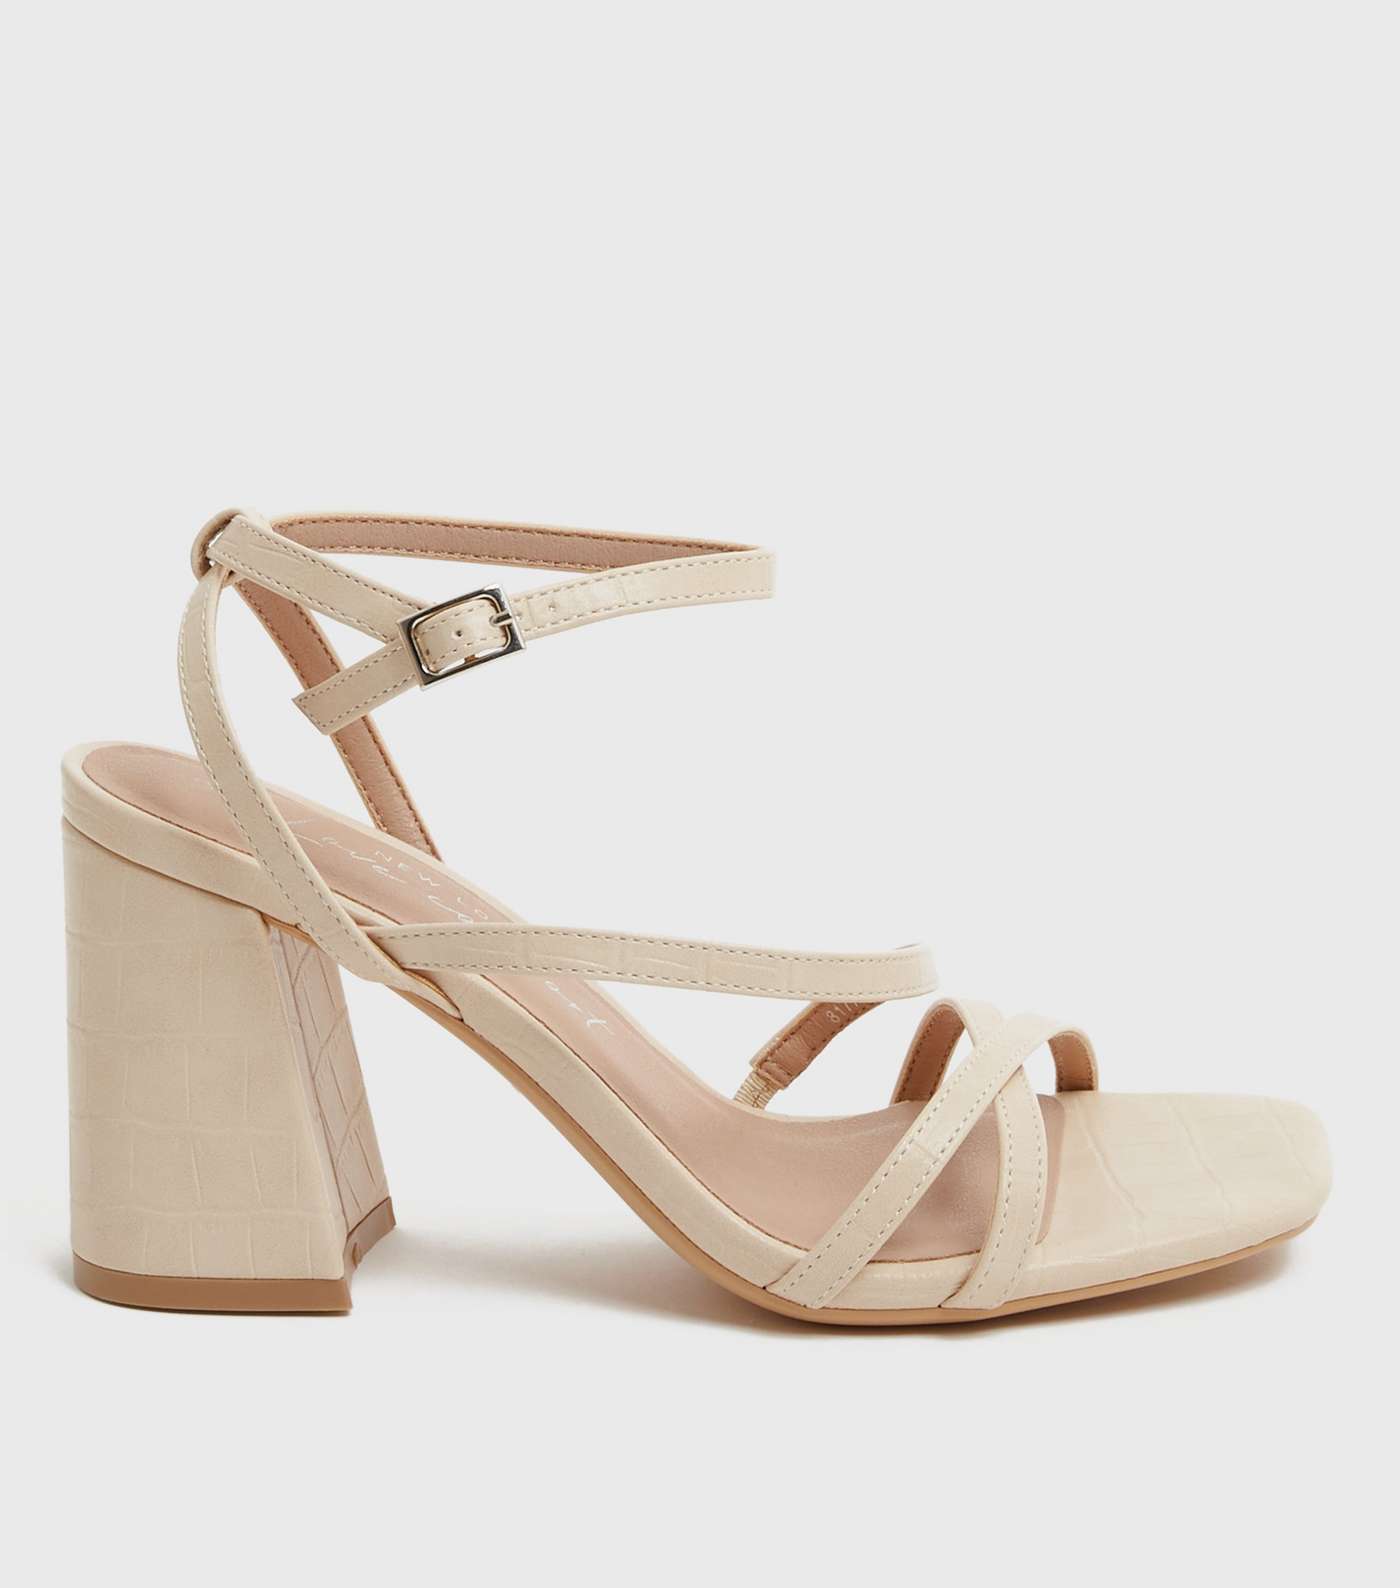 Off White Faux Croc Strappy Flared Block Heel Sandals